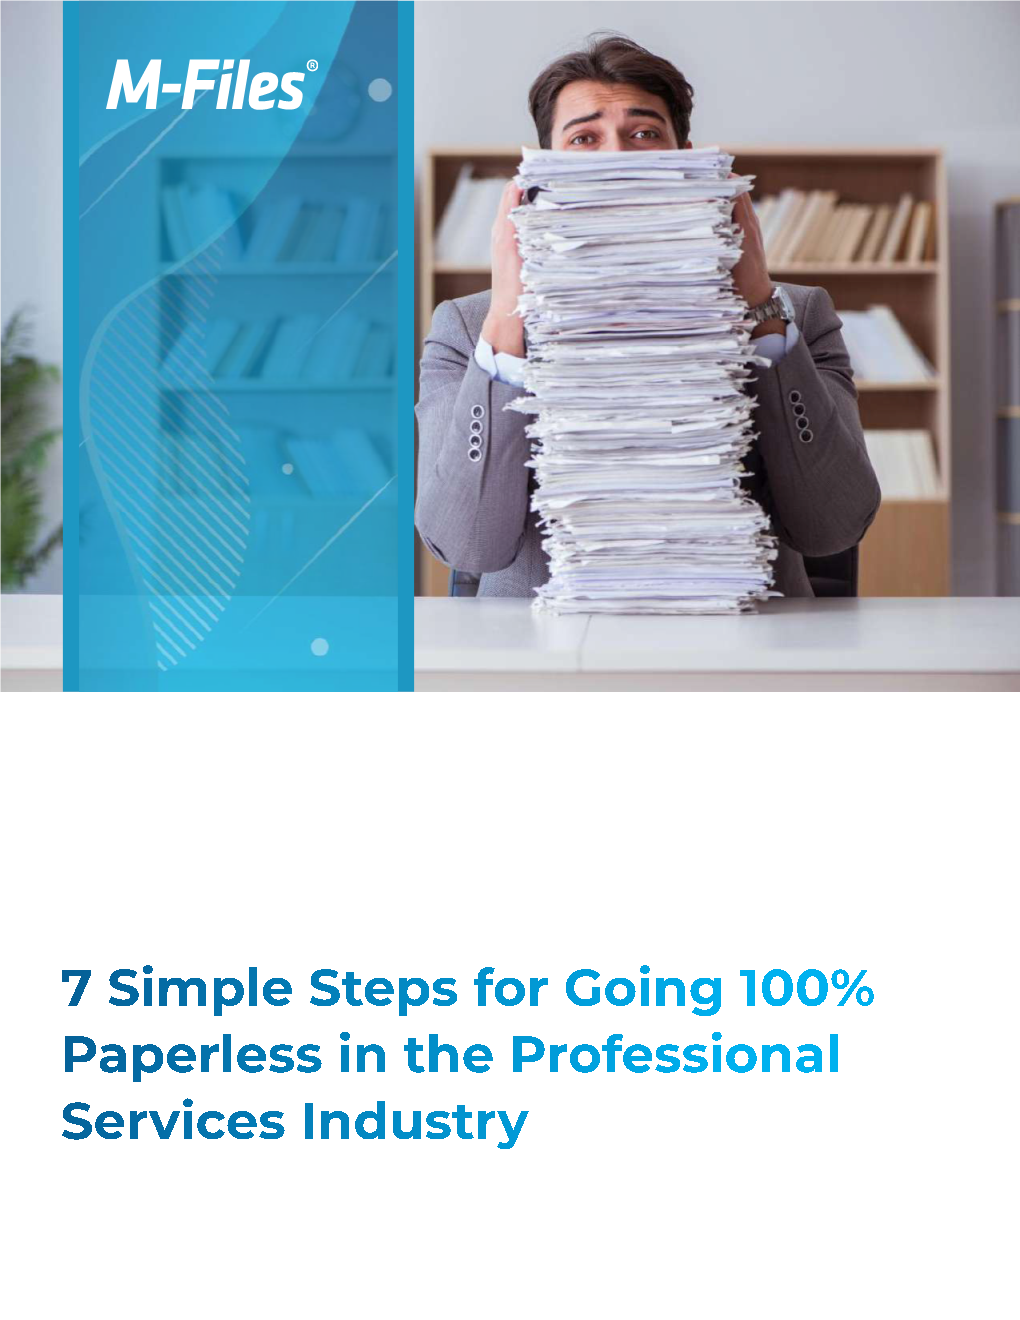 7 Simple Steps for Going 100% Paperless in the Professional Services Industry